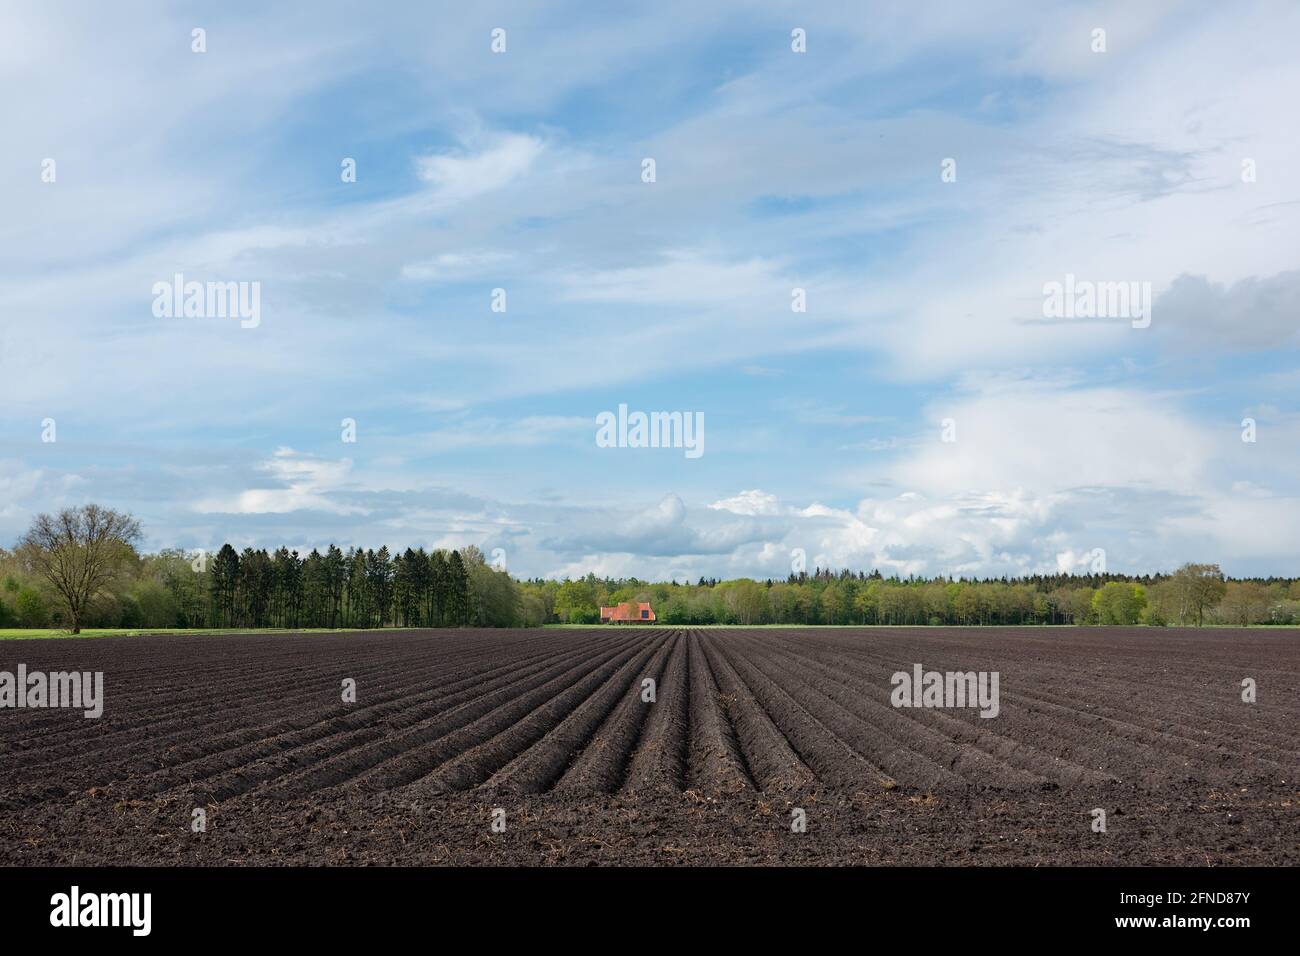 Rural landscape in spring with field, prepared for cultivation of lilies, under blue sky with clouds, in distance a red tiled farmhouse and a forest Stock Photo